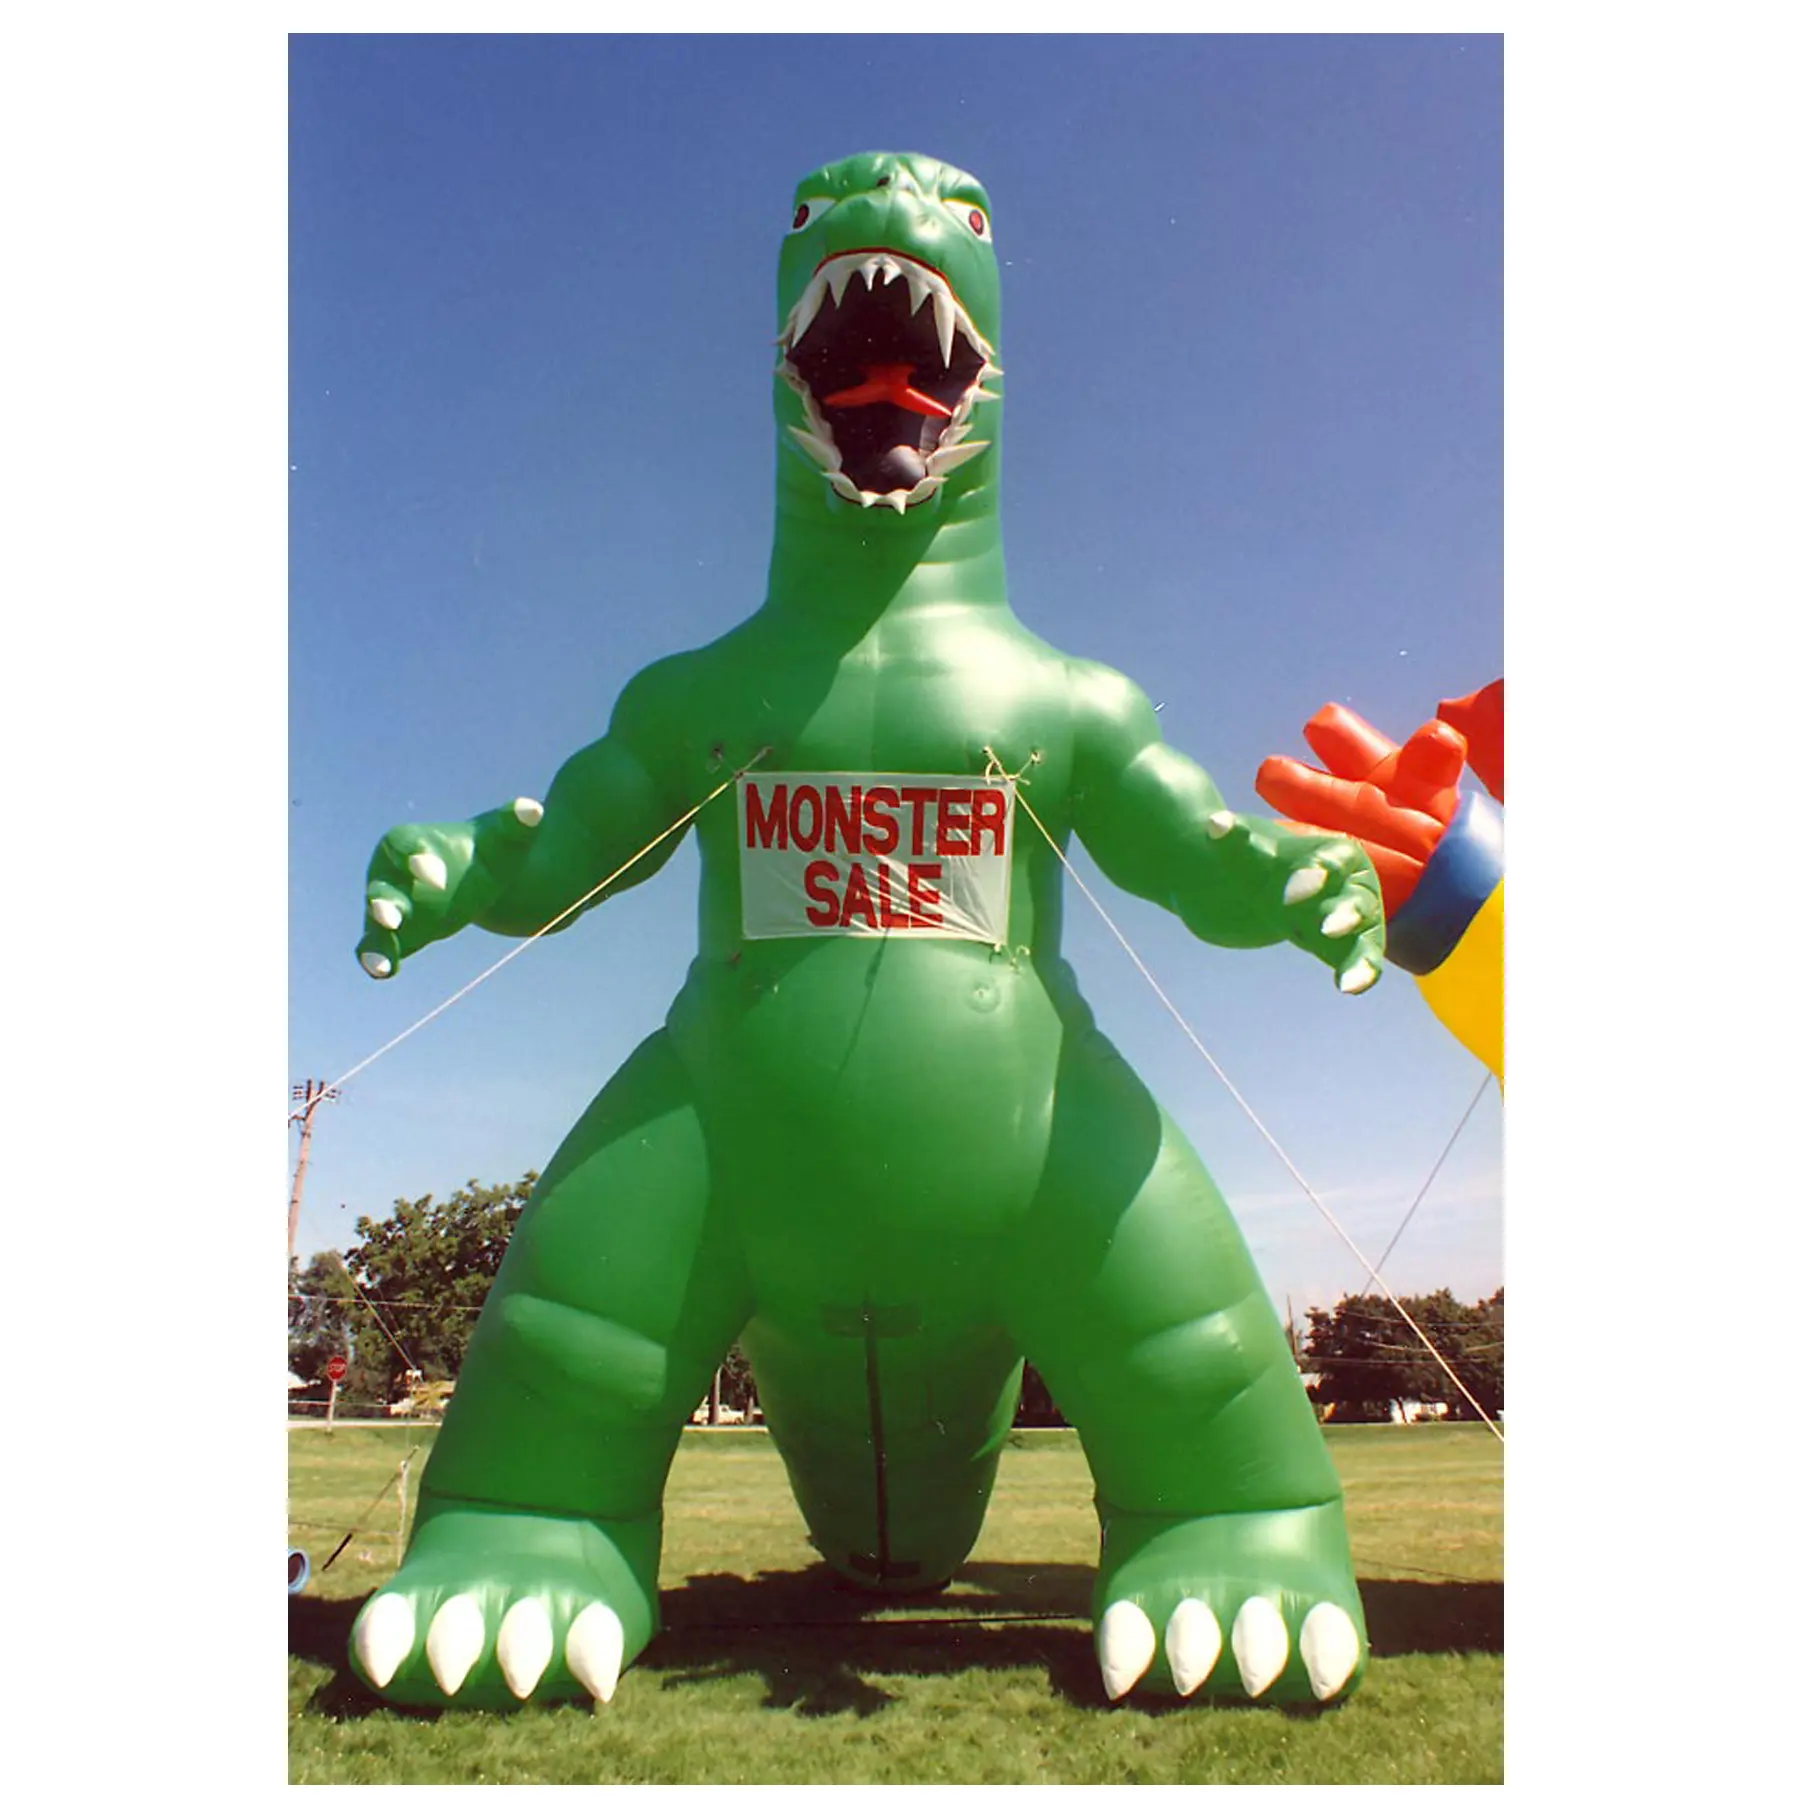 20ft Tall Large Inflatable Godzilla Dinosaur/Giant Inflatable Monster For Sale